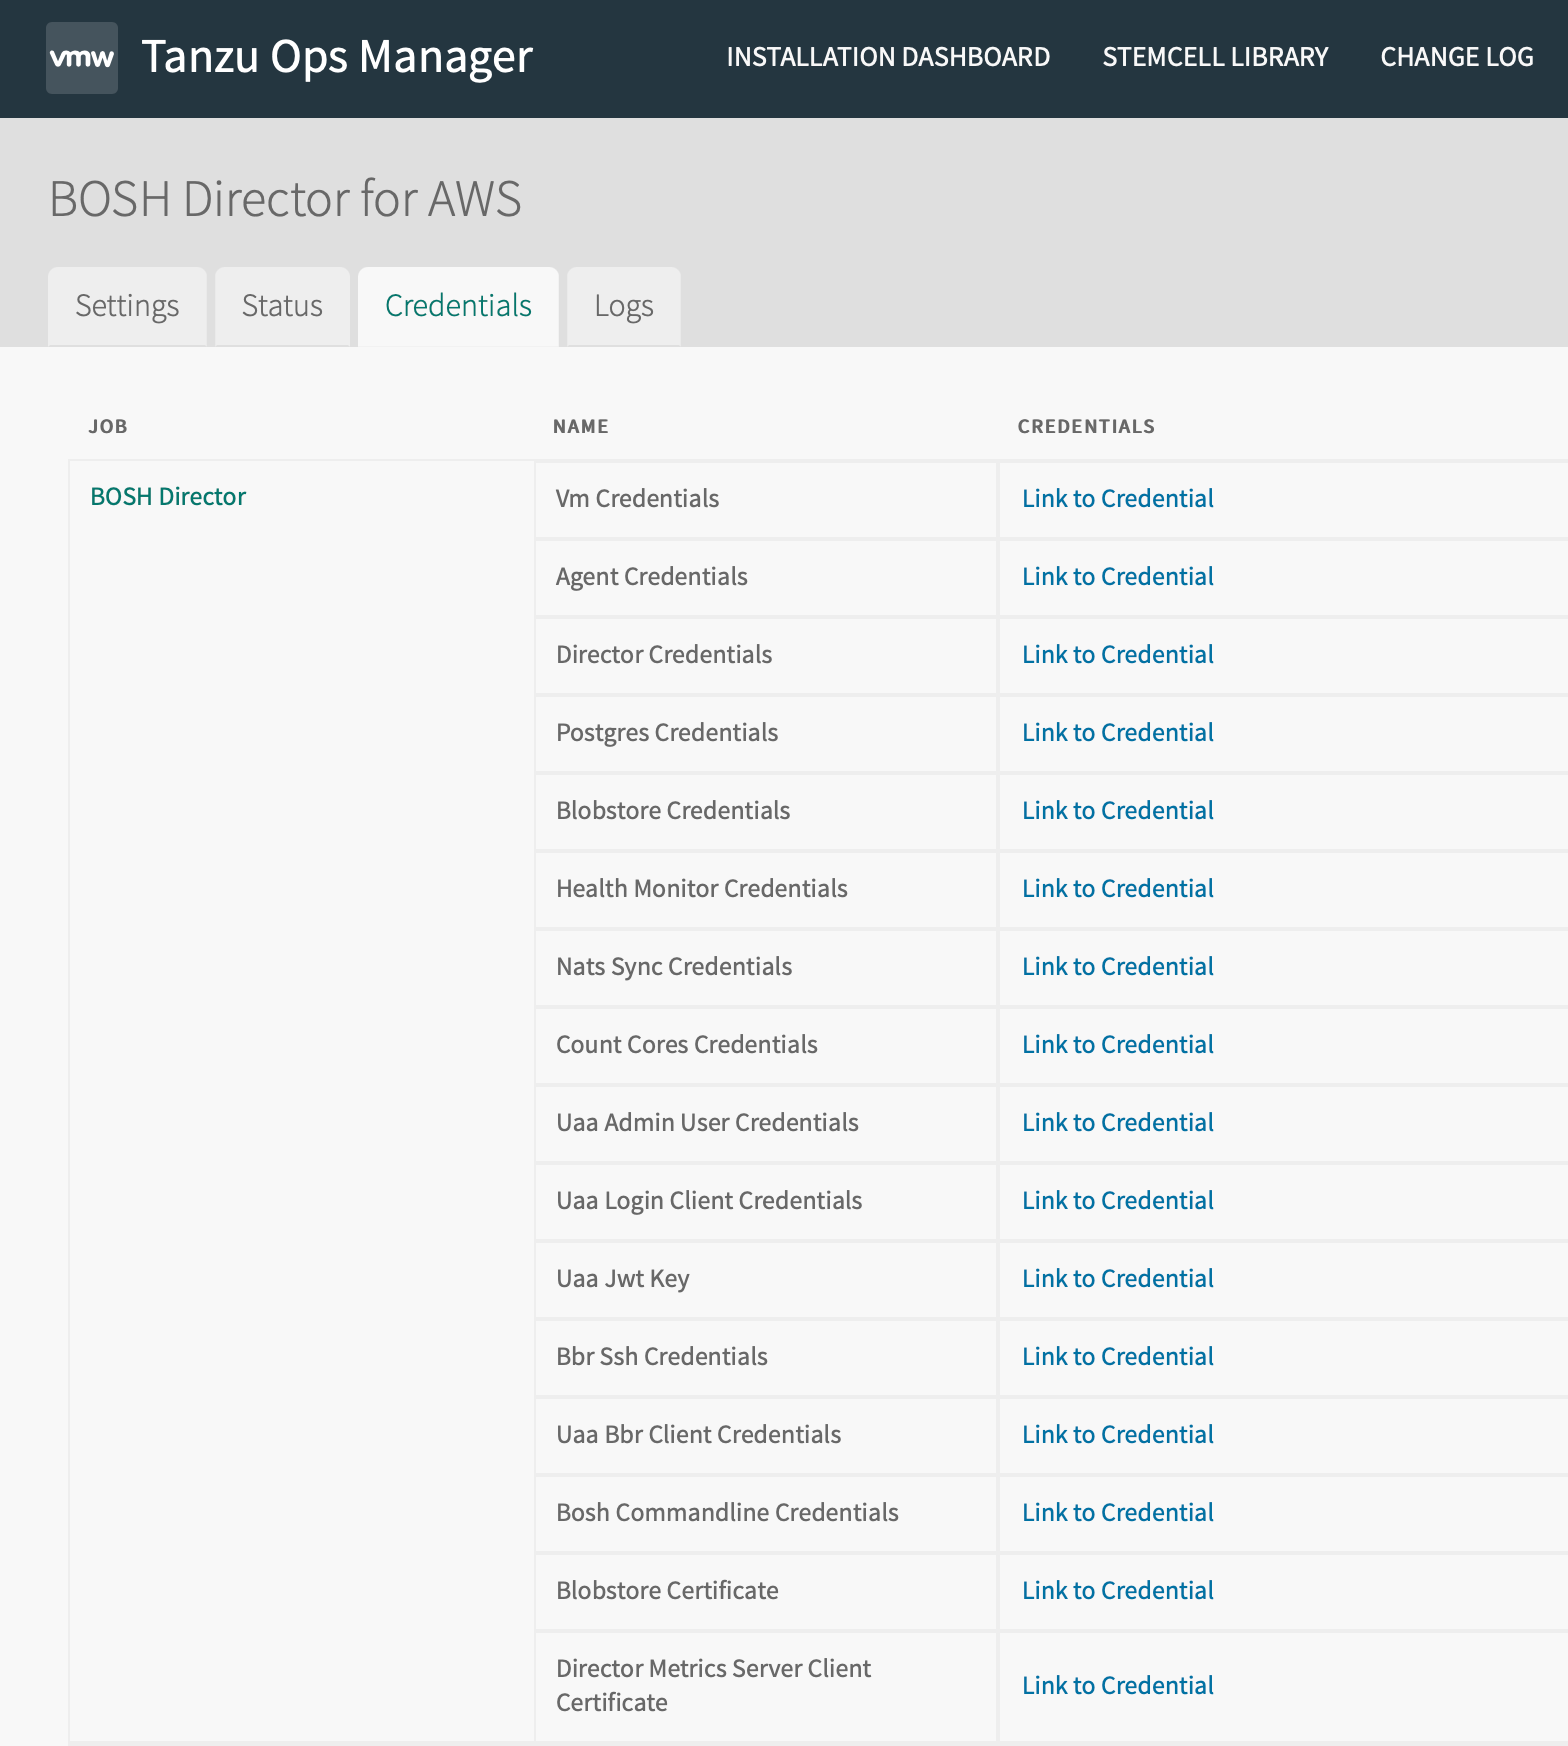 BOSH Director Credentials pane showing links to many types of credentials.